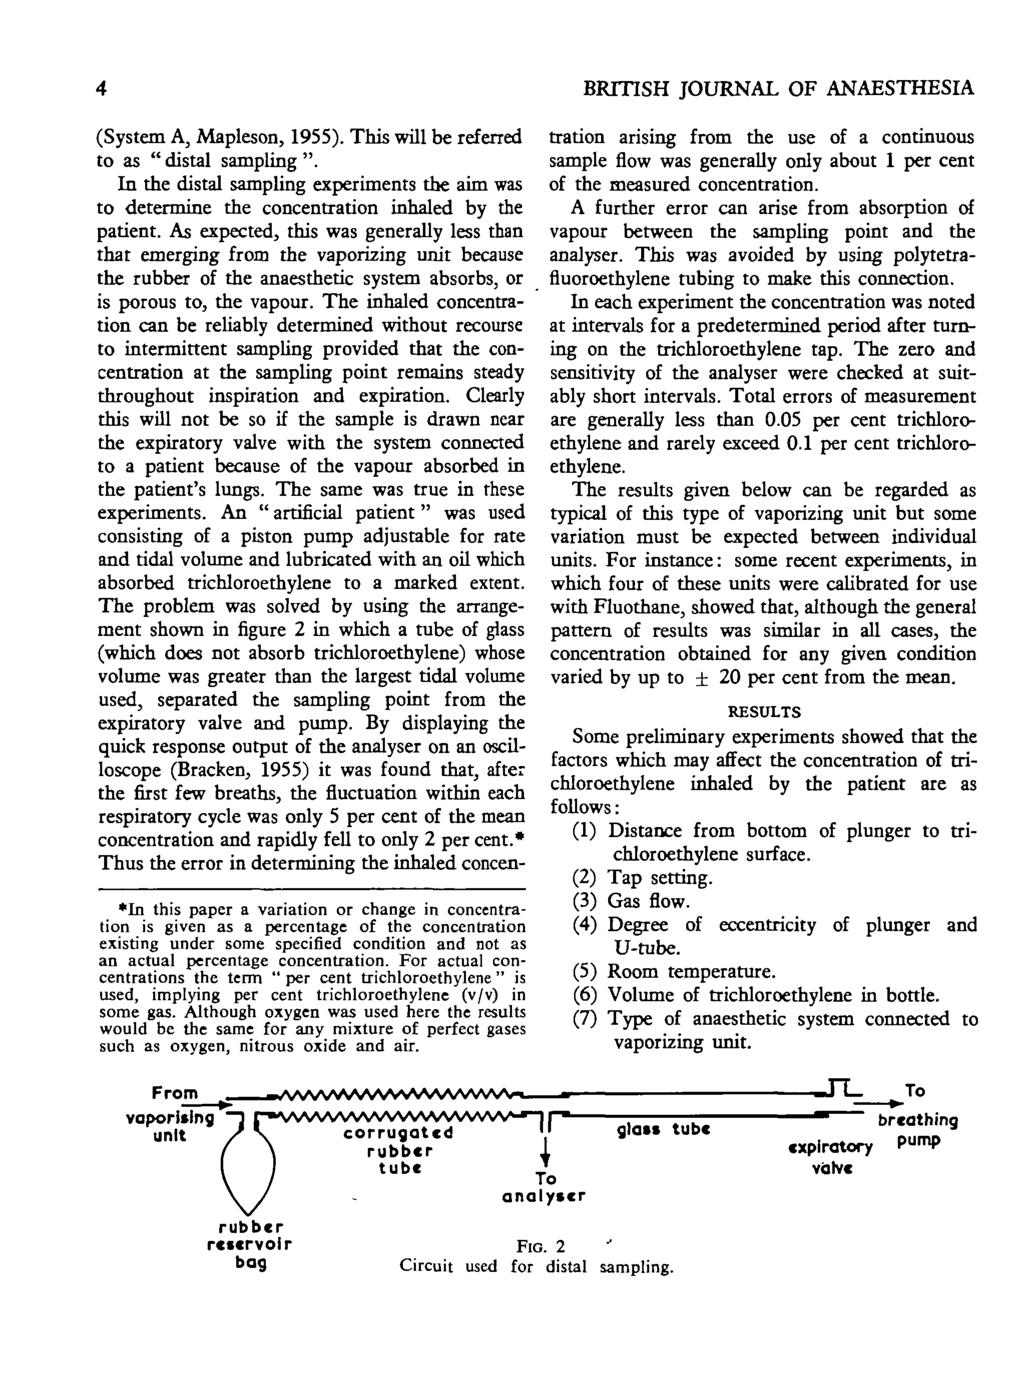 (System A, Mapleson, 1955). This will be referred to as " distal sampling ". In the distal sampling experiments the aim was to determine the concentration inhaled by the patient.